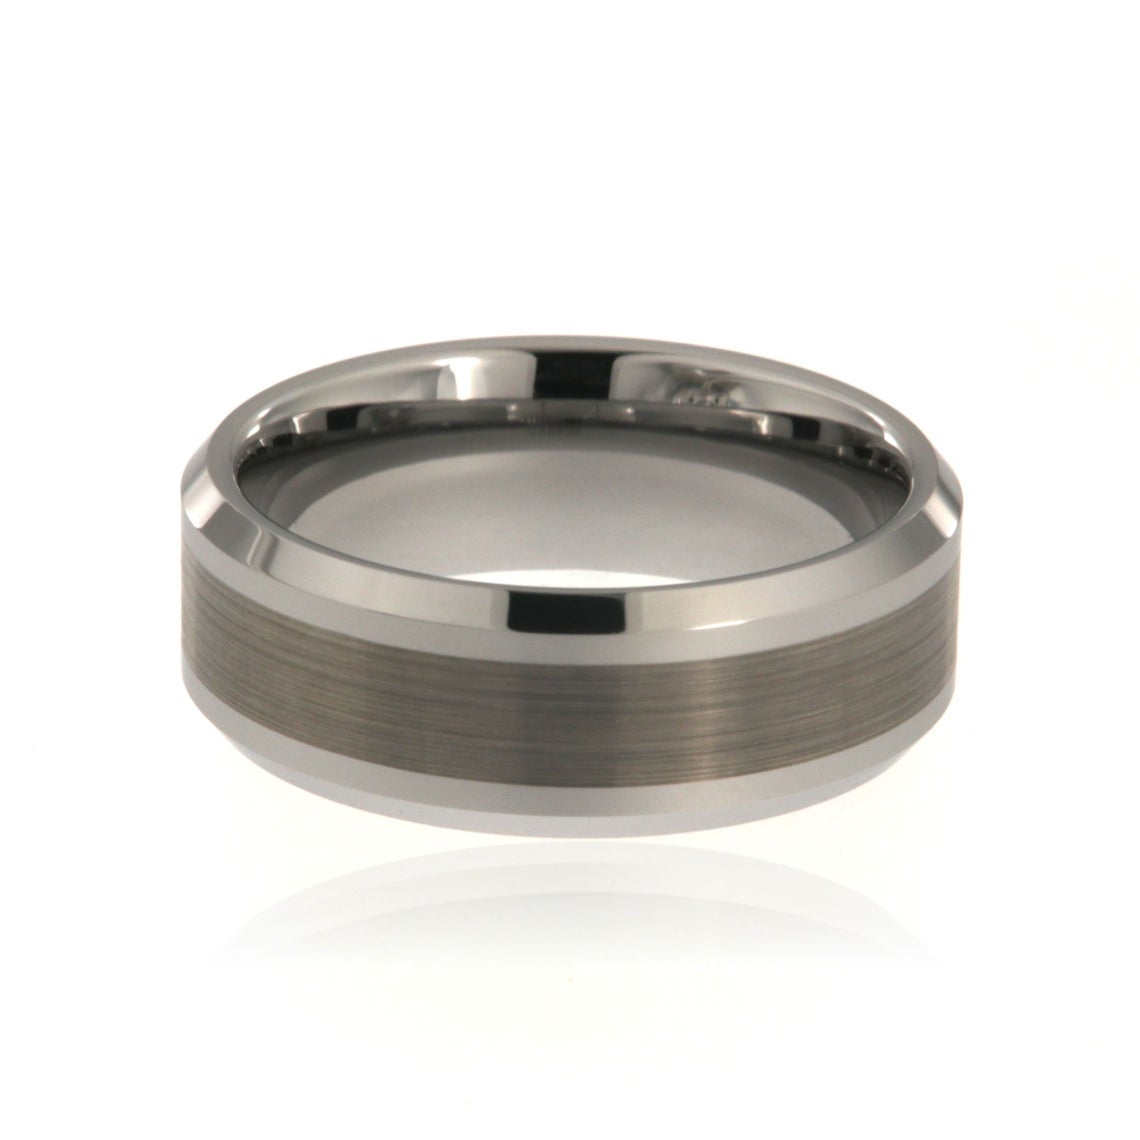 8mm wide tungsten ring with a brushed finish center and beveled edges